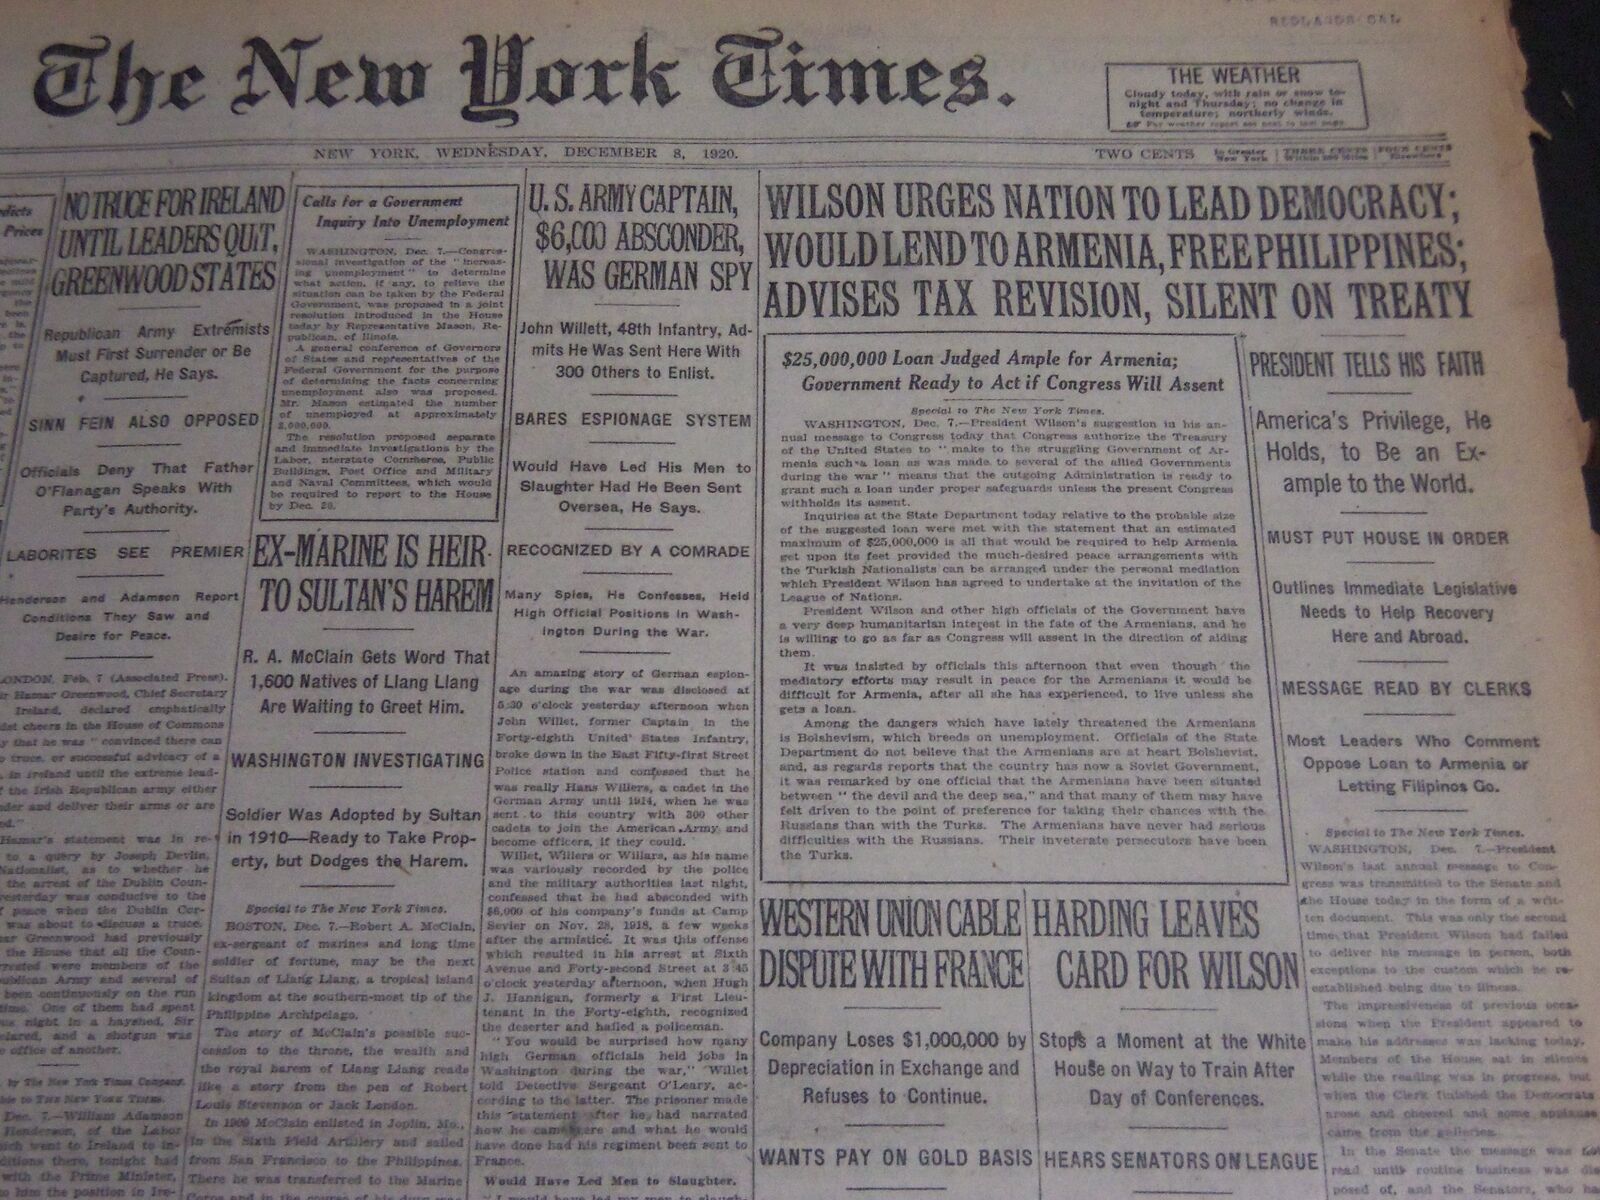 1920 DECEMBER 8 NEW YORK TIMES - WILSON URGES NATION TO LEAD DEMOCRACY - NT 6735